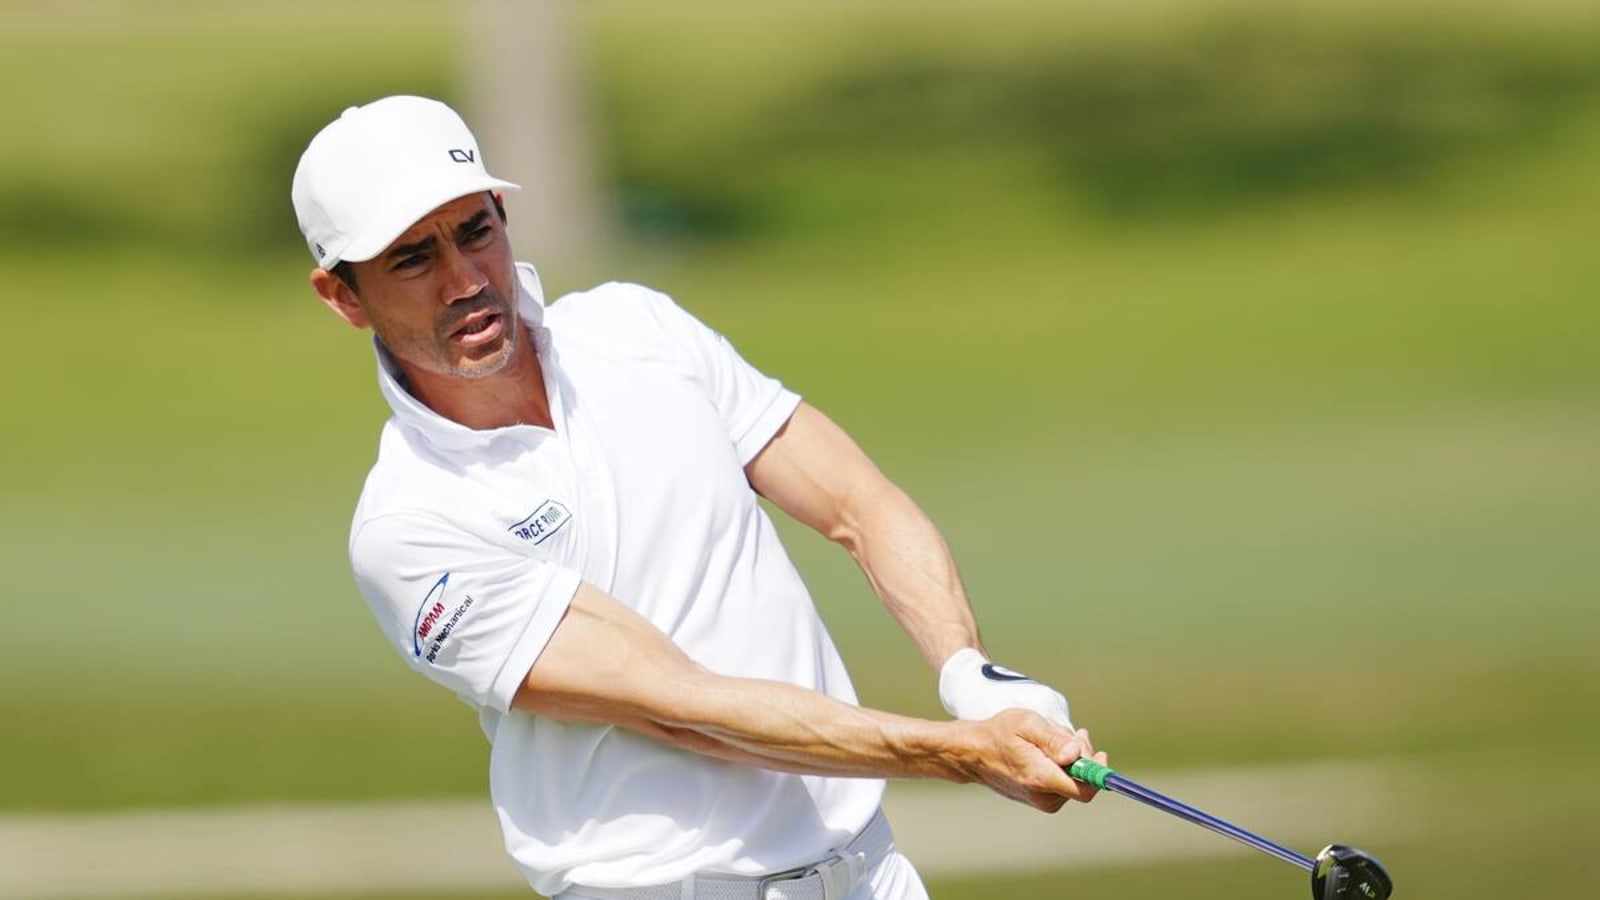 Camilo Villegas at the Wells Fargo Championship Live: TV Channel & Streaming Online